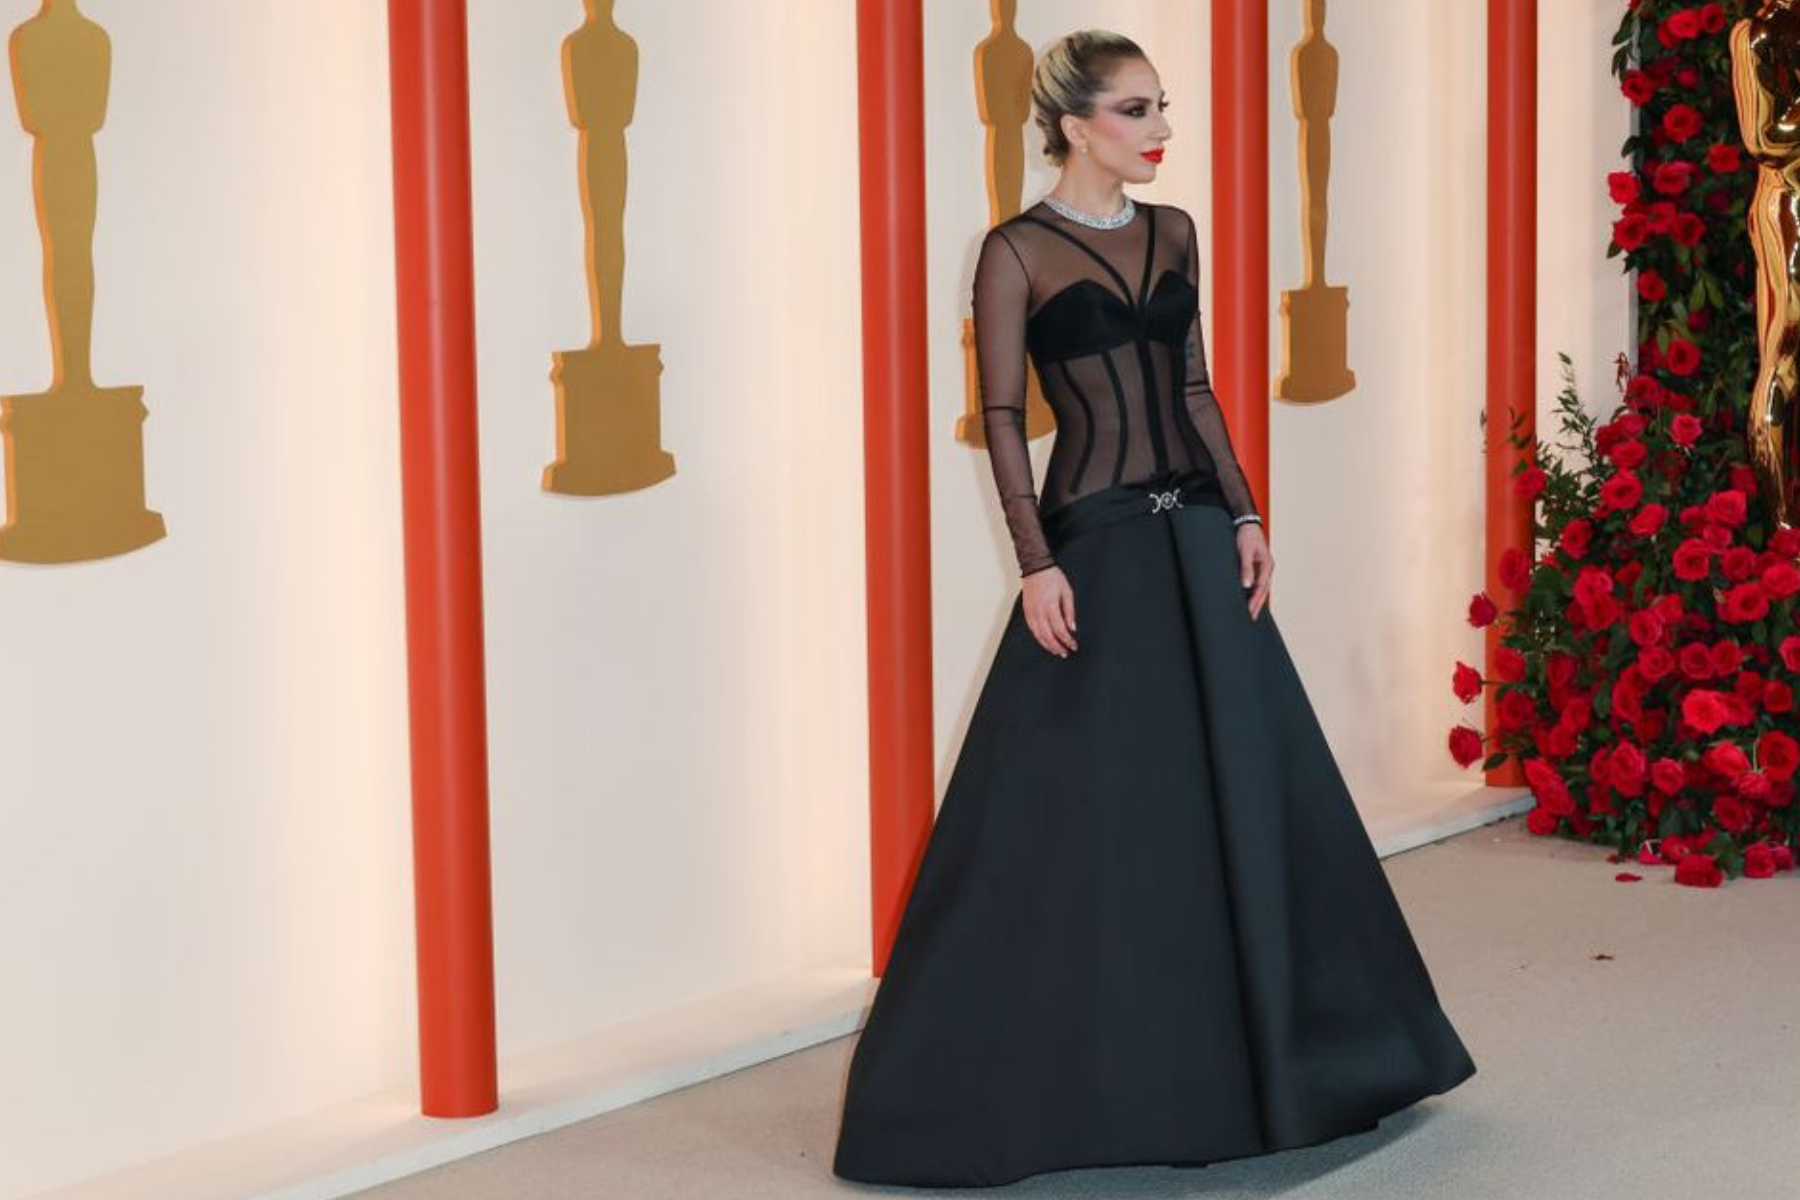 Lady Gaga’s complete look at the Oscars this evening